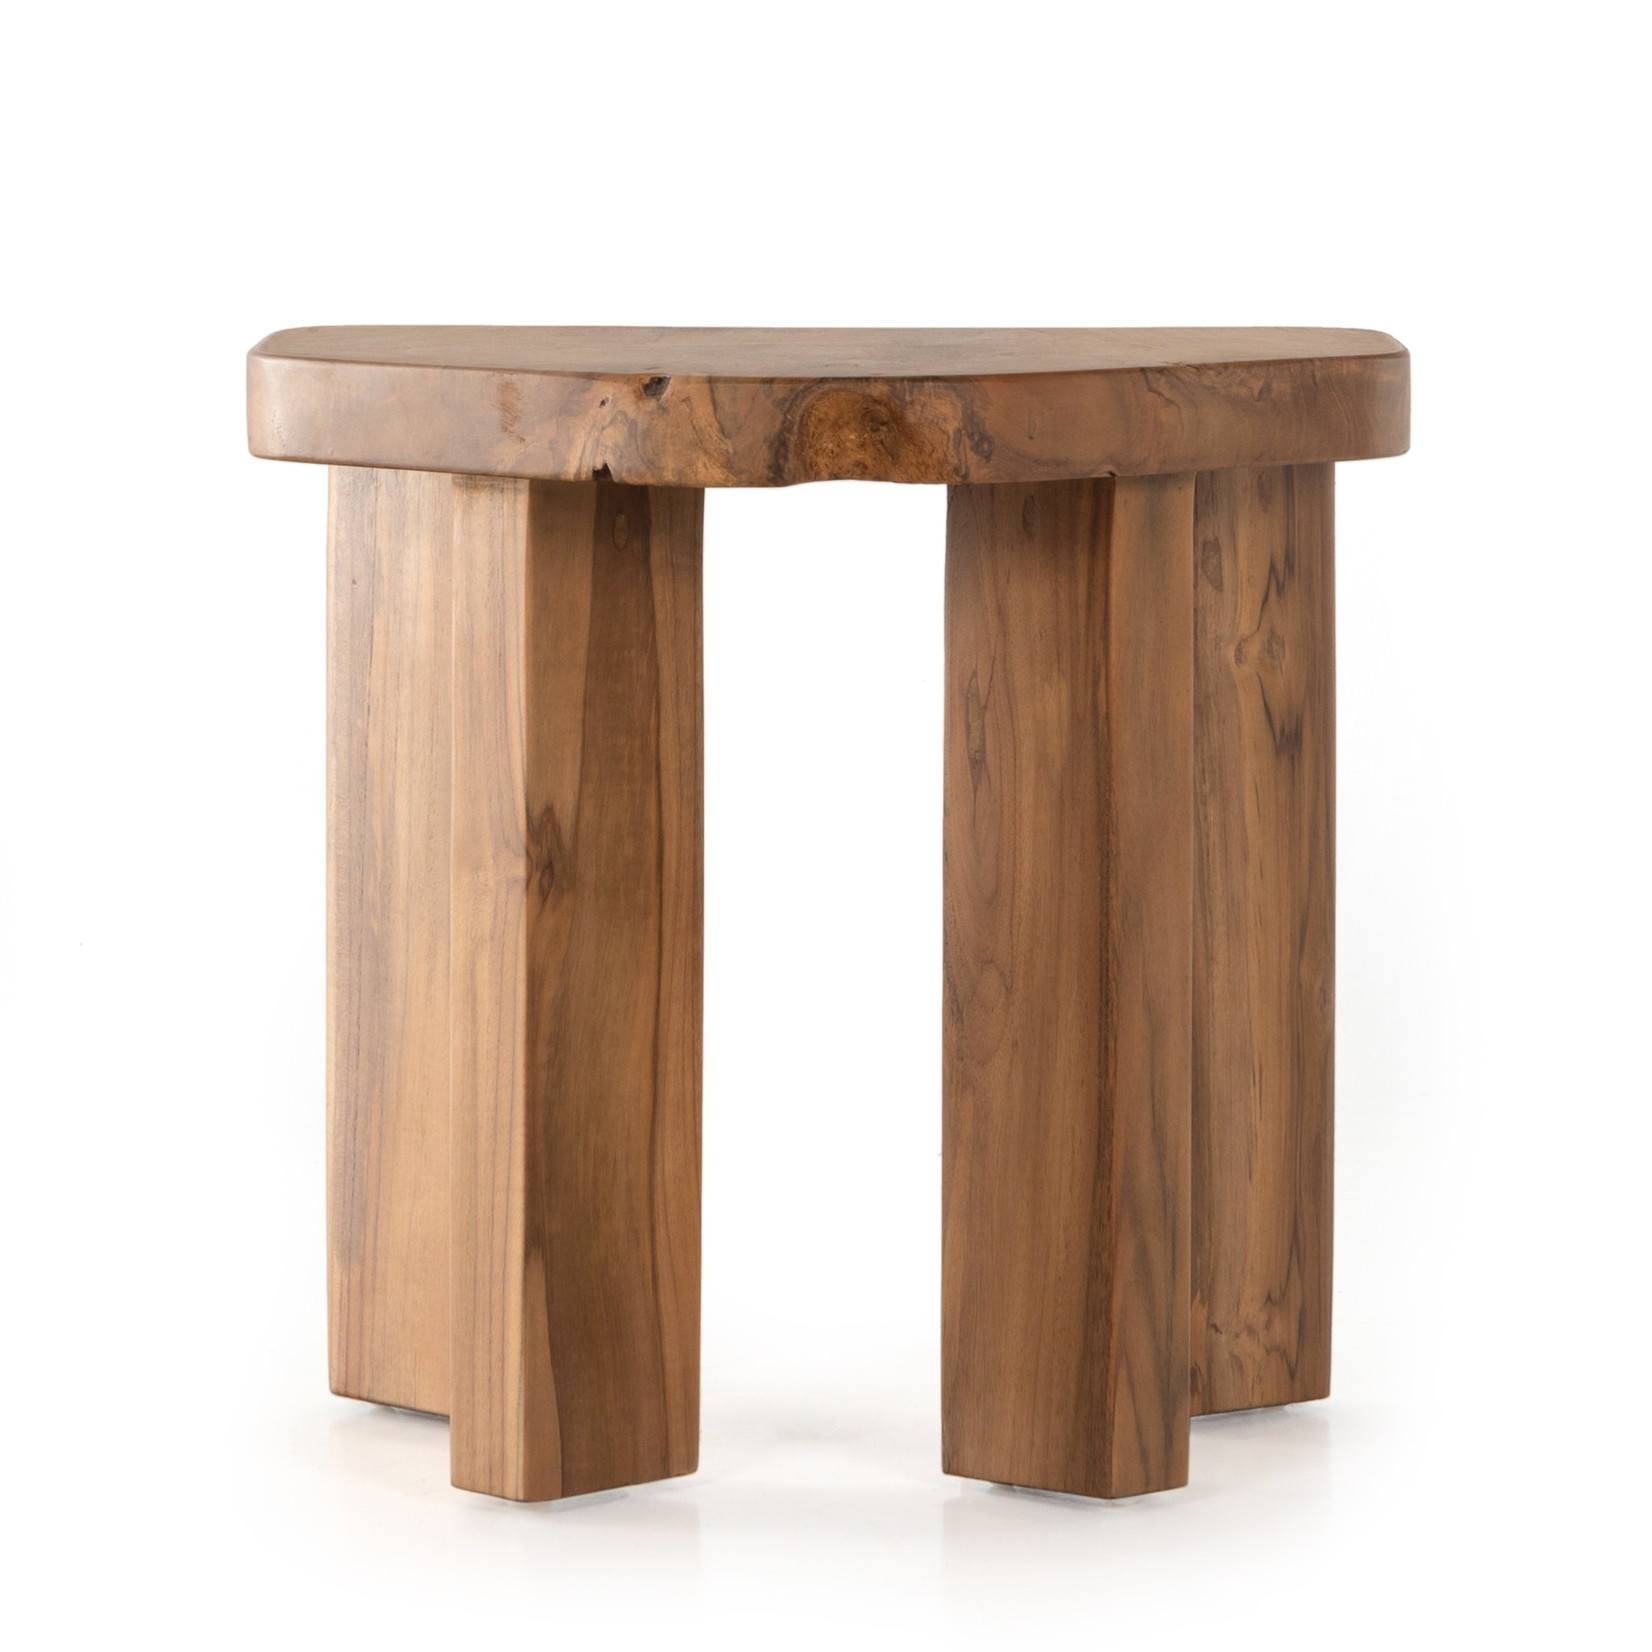 Four Hands HAINES ACCENT STOOL-AGED NATURAL TEAK